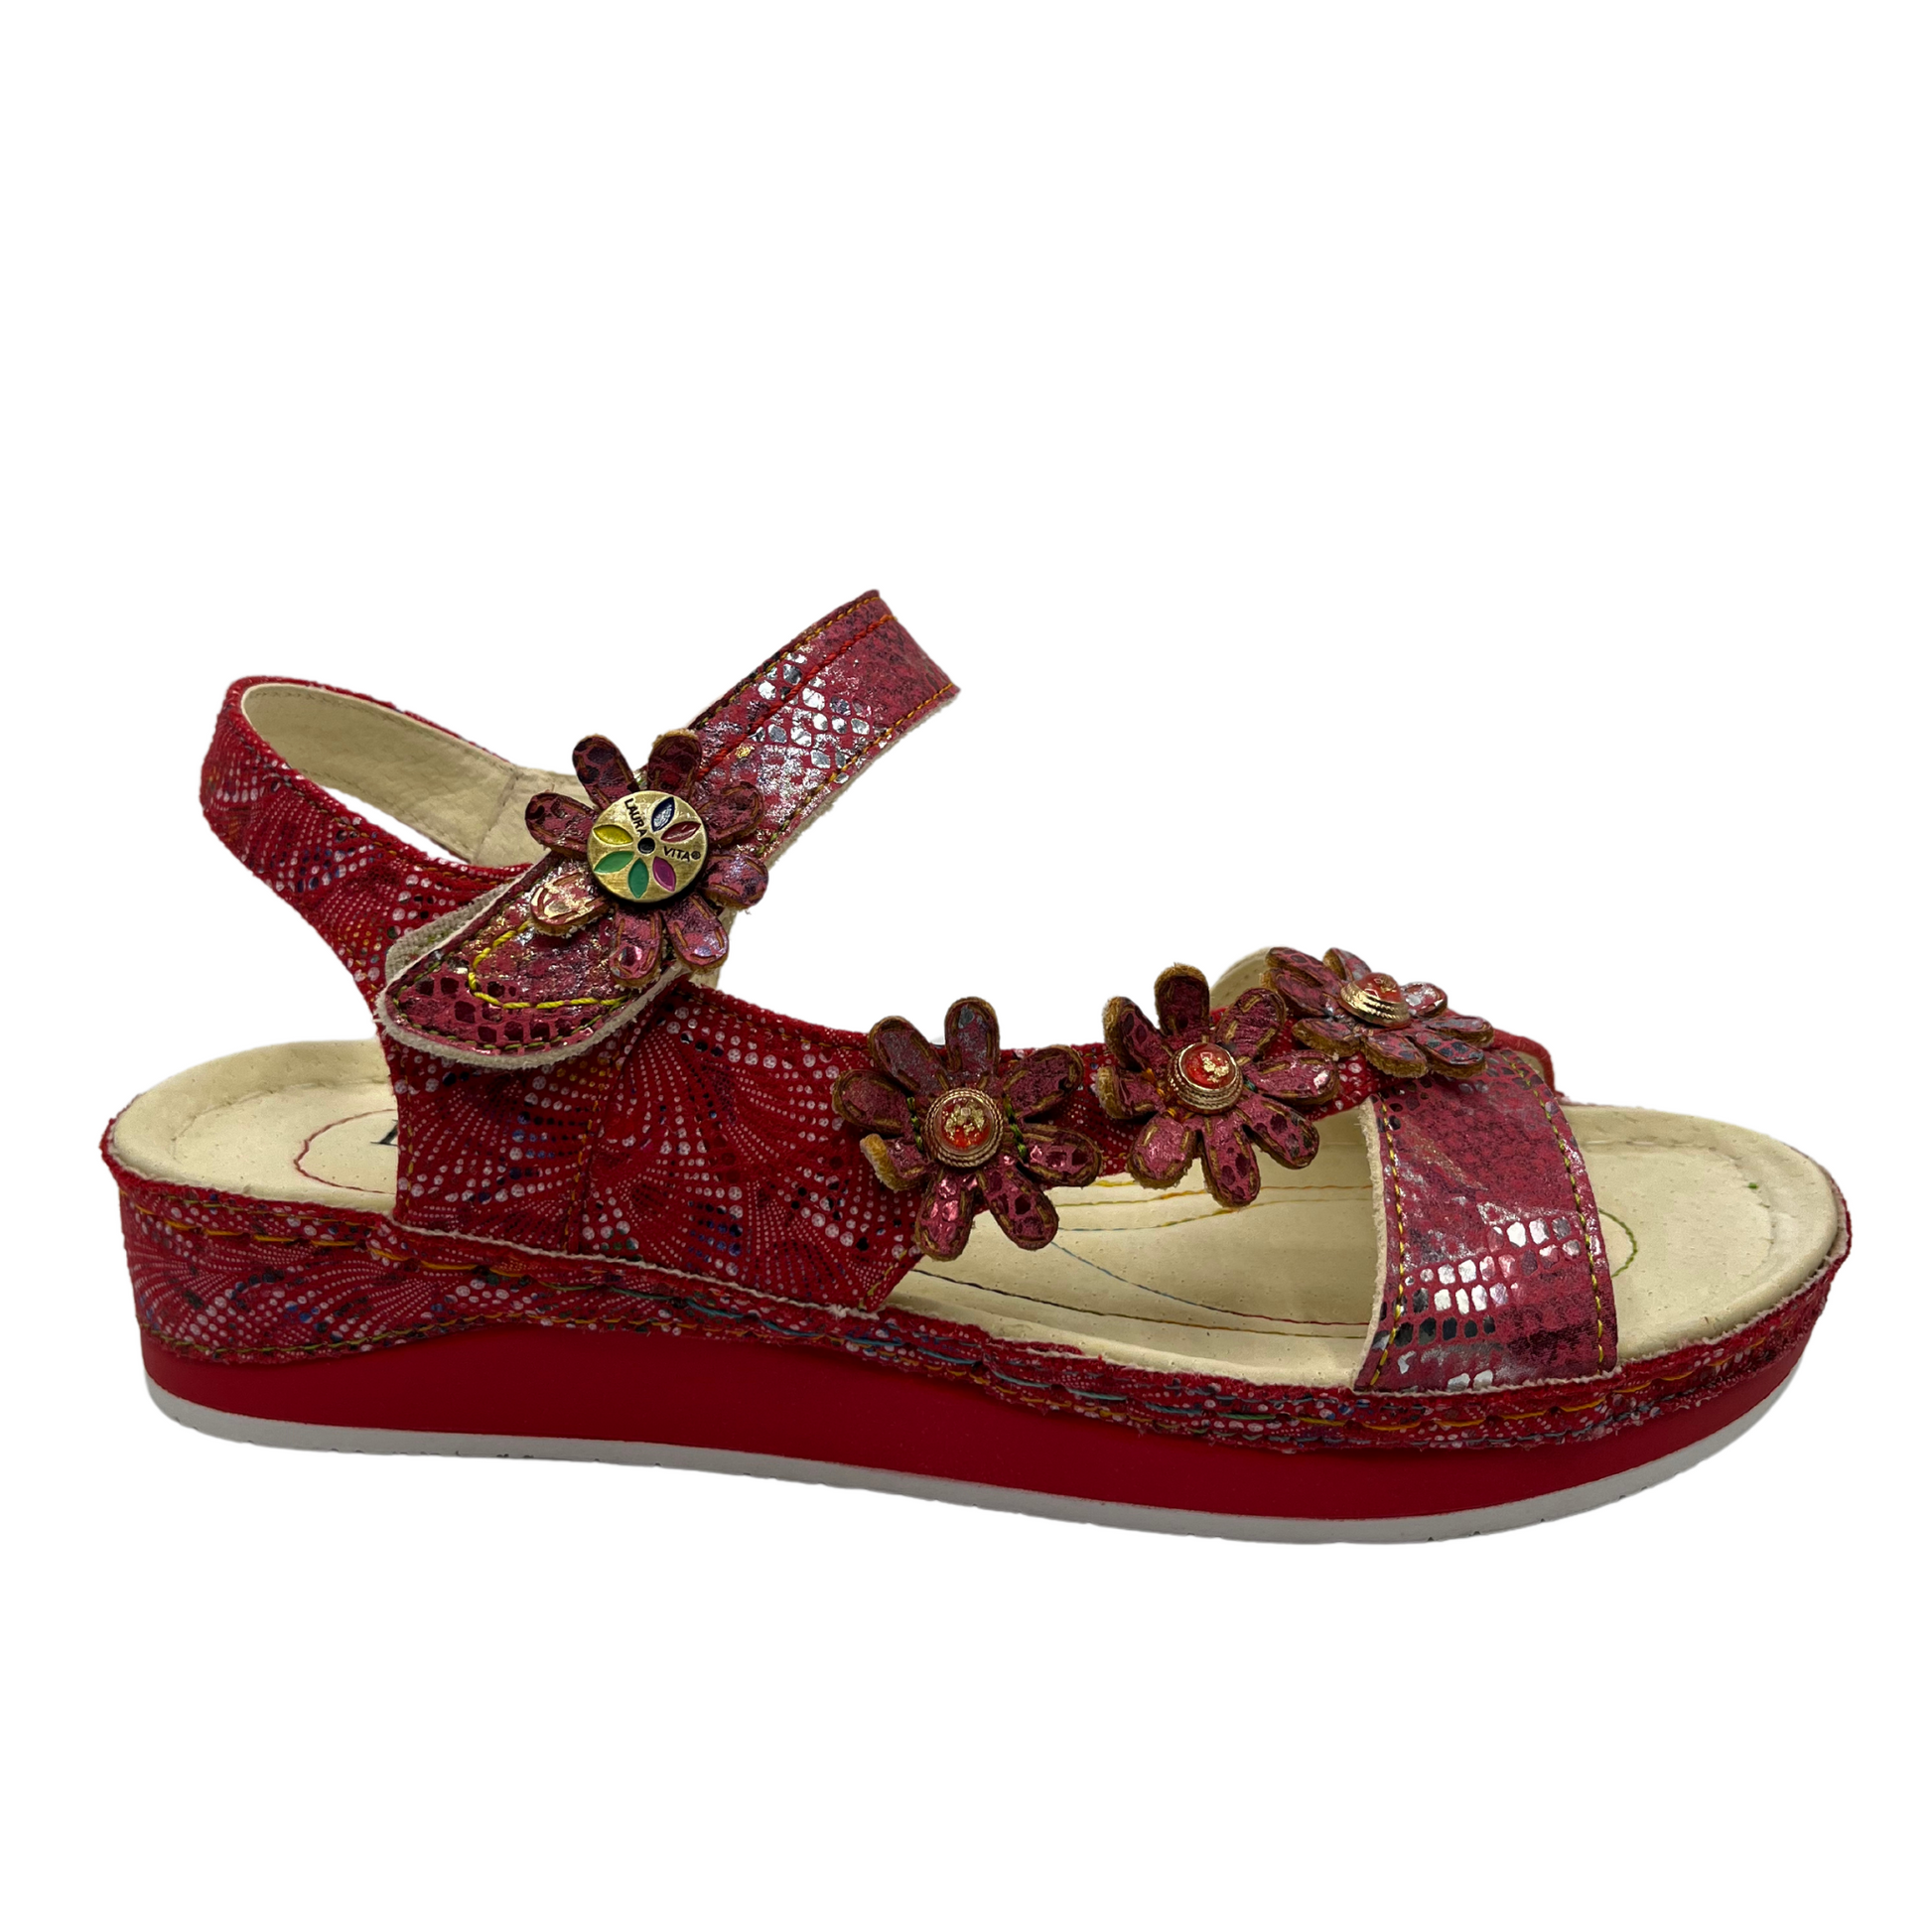 Right facing view of a red leather sandal with flower details and velcro ankle strap